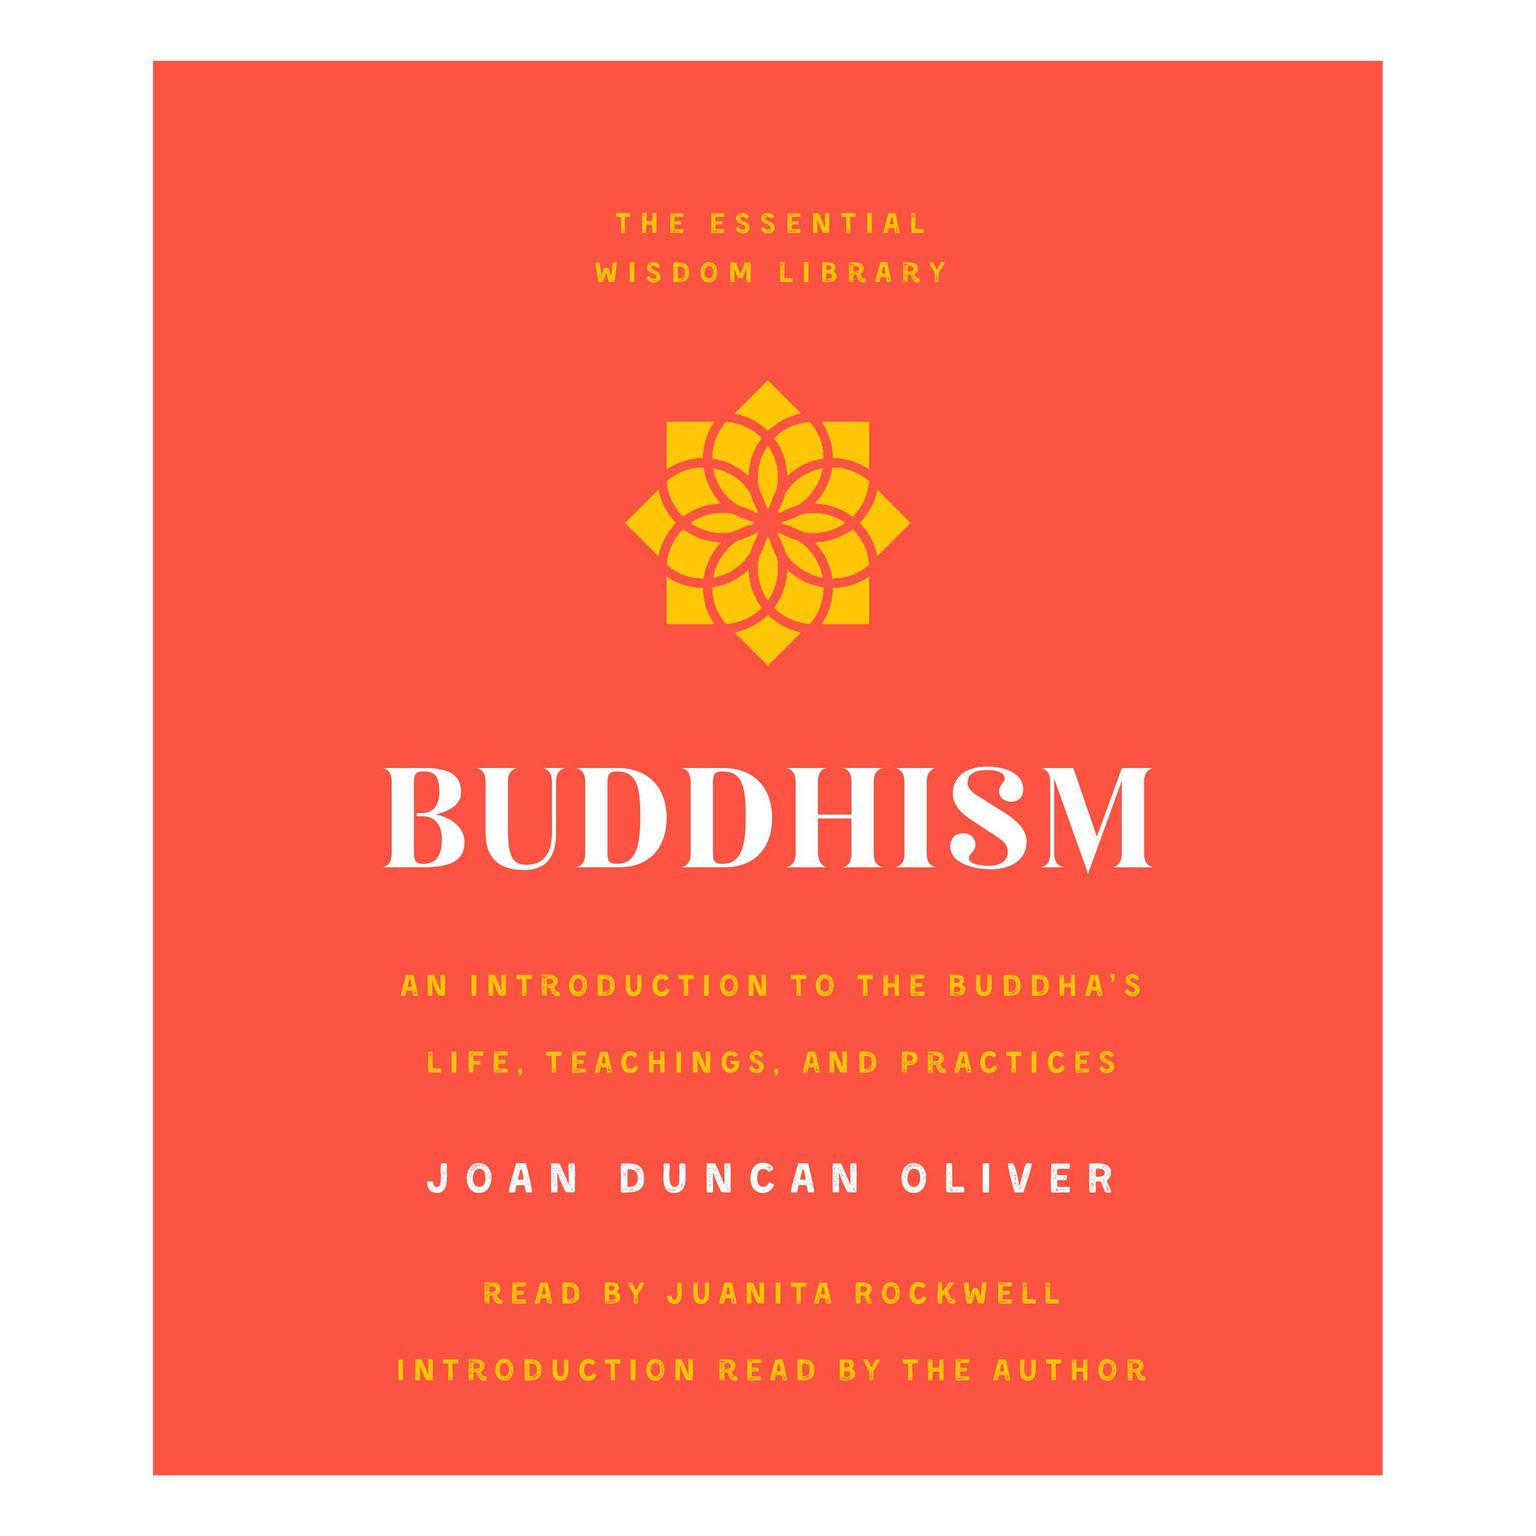 Buddhism: An Introduction to the Buddhas Life, Teachings, and Practices (The Essential Wisdom Library) Audiobook, by Joan Duncan Oliver